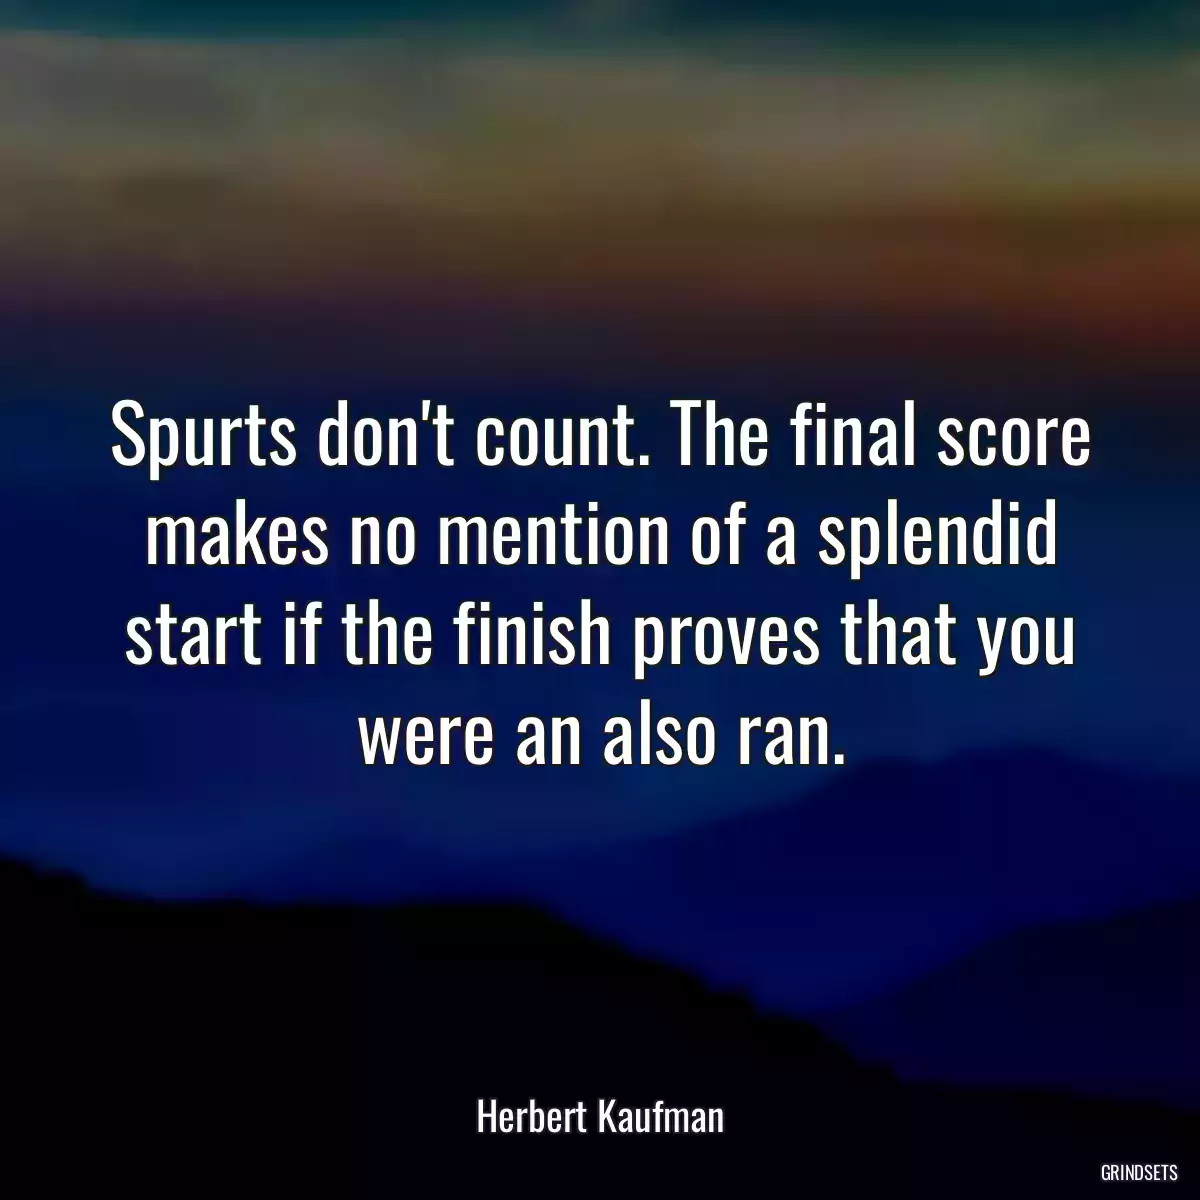 Spurts don\'t count. The final score makes no mention of a splendid start if the finish proves that you were an also ran.